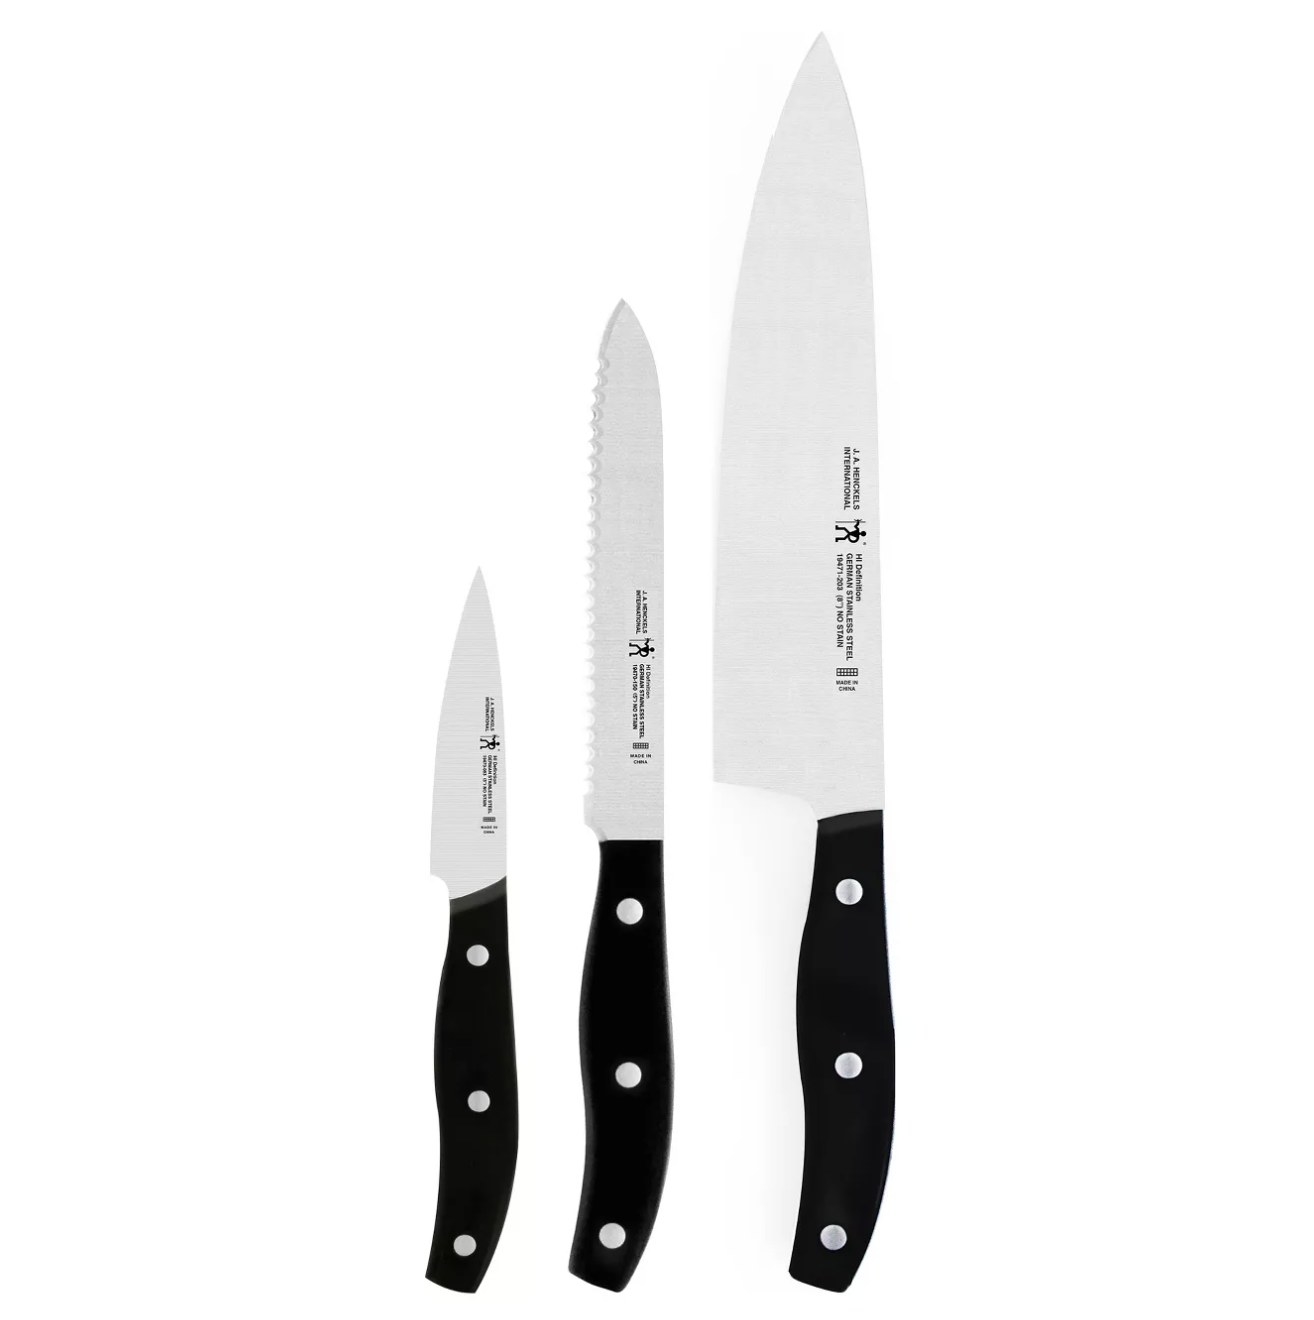 A set of three knives with black handles